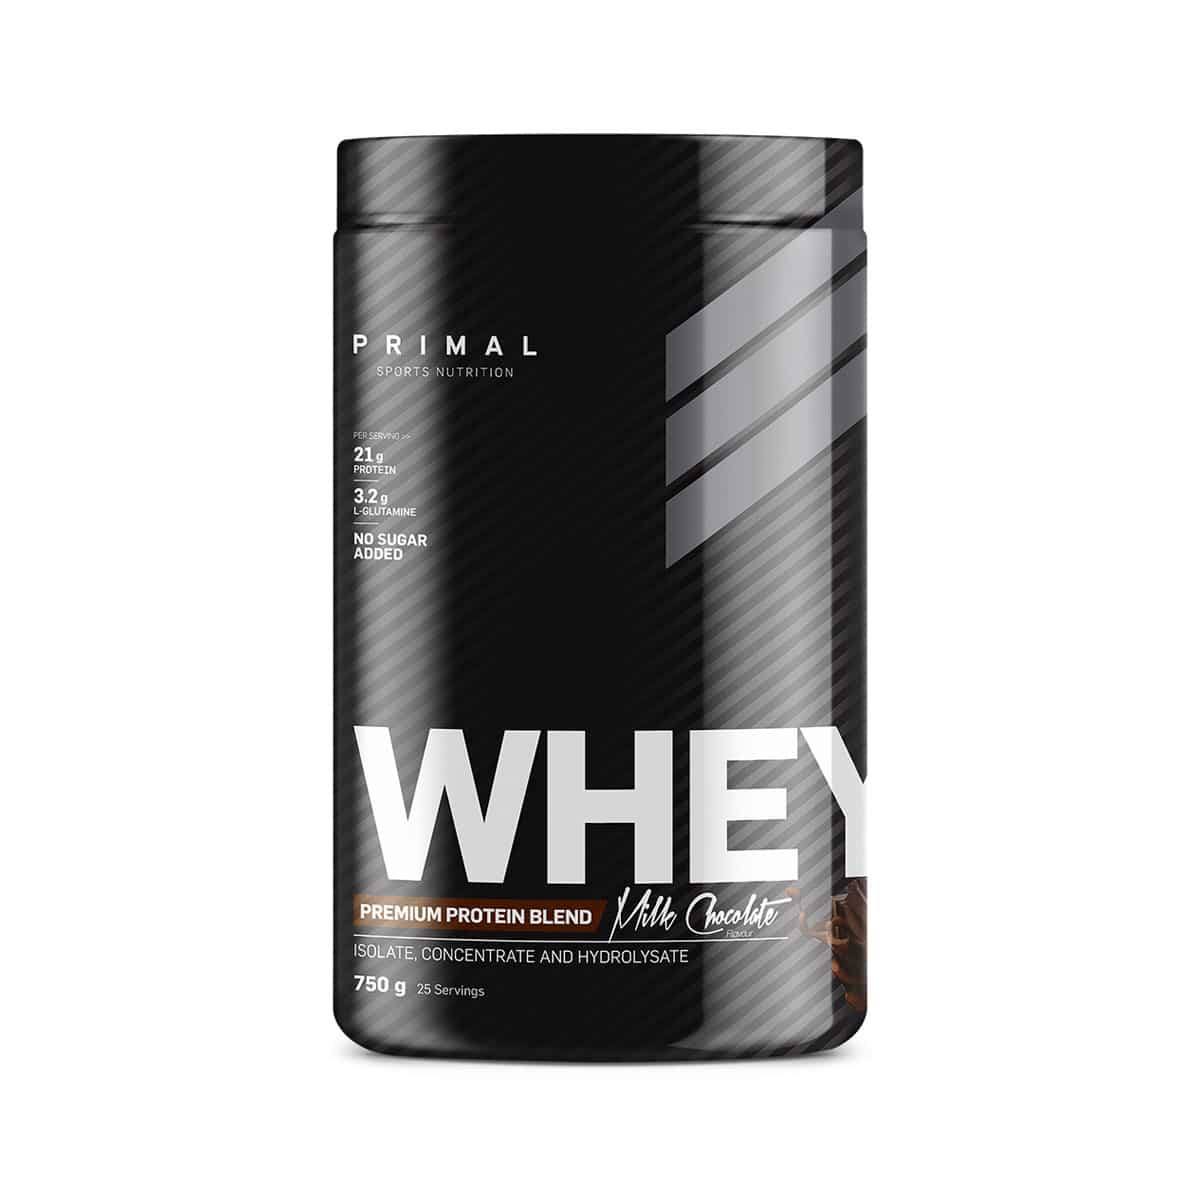 Primal Whey Protein Chocolate - 750g